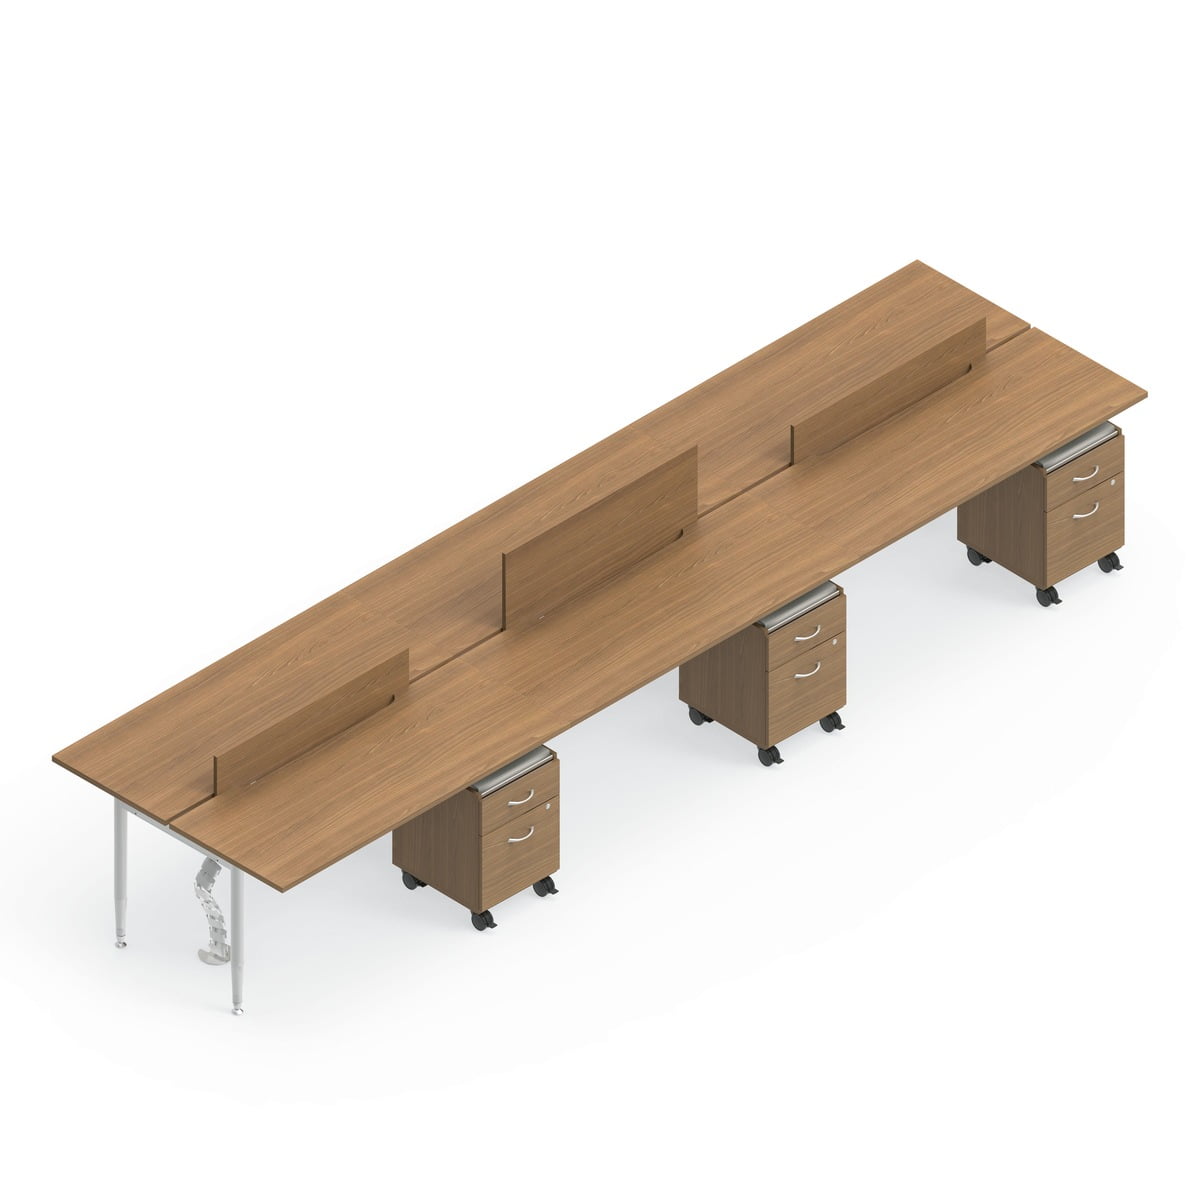 Global Sidebar 6-Person Benching, with white background. Mobile pedestal drawers are placed just underneath each station. Three adjustable matching partitions emerge from the center of the bench, shown at different heights.